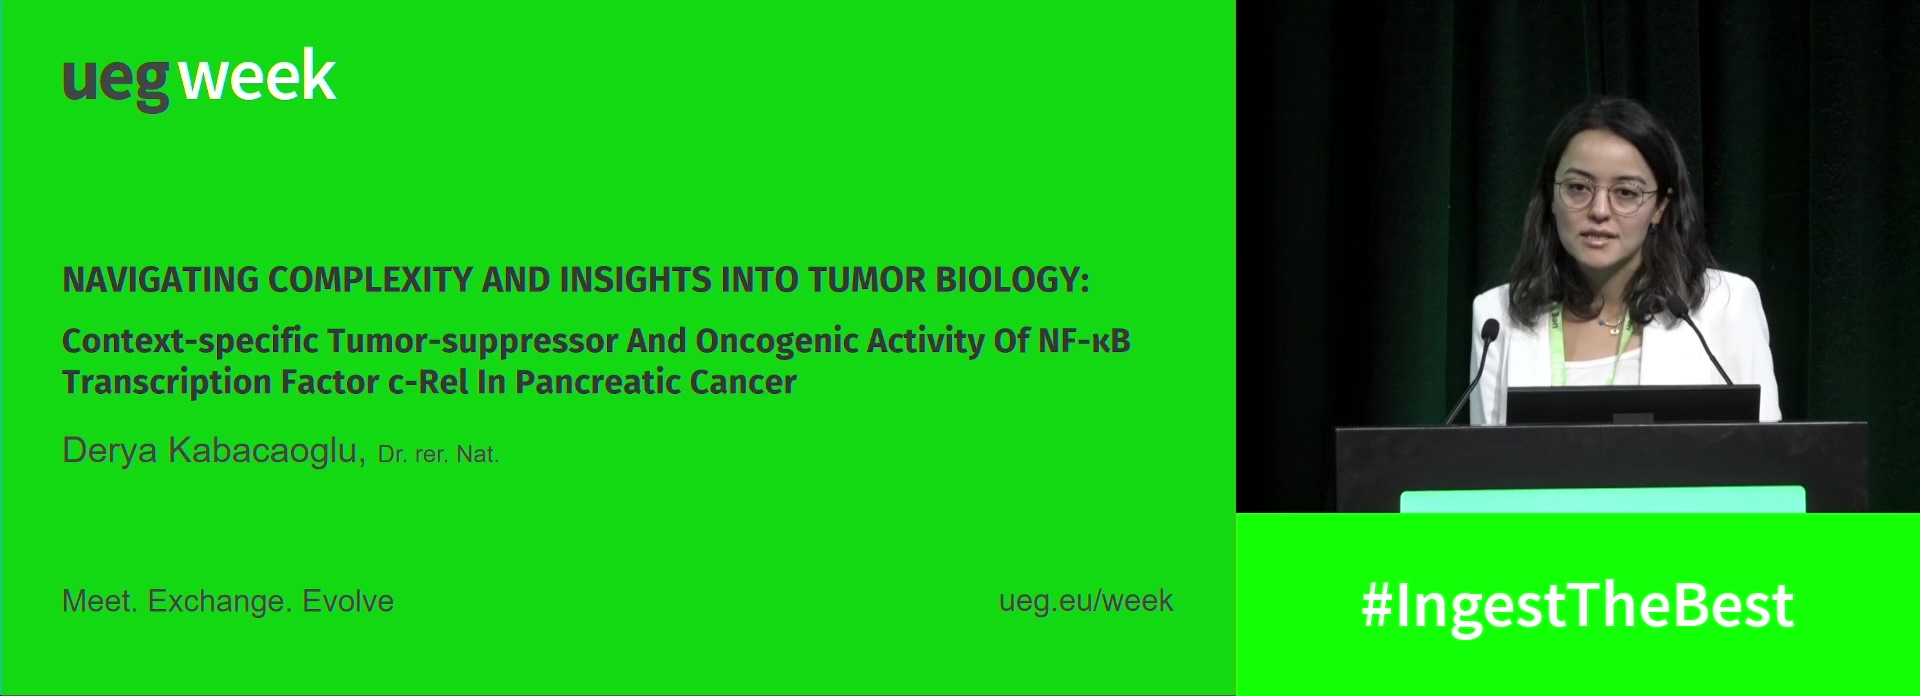 CONTEXT-SPECIFIC TUMOR-SUPPRESSOR AND ONCOGENIC ACTIVITY OF NF-ΚB TRANSCRIPTION FACTOR C-REL IN PANCREATIC CANCER: NAVIGATING COMPLEXITY AND INSIGHTS INTO TUMOR BIOLOGY